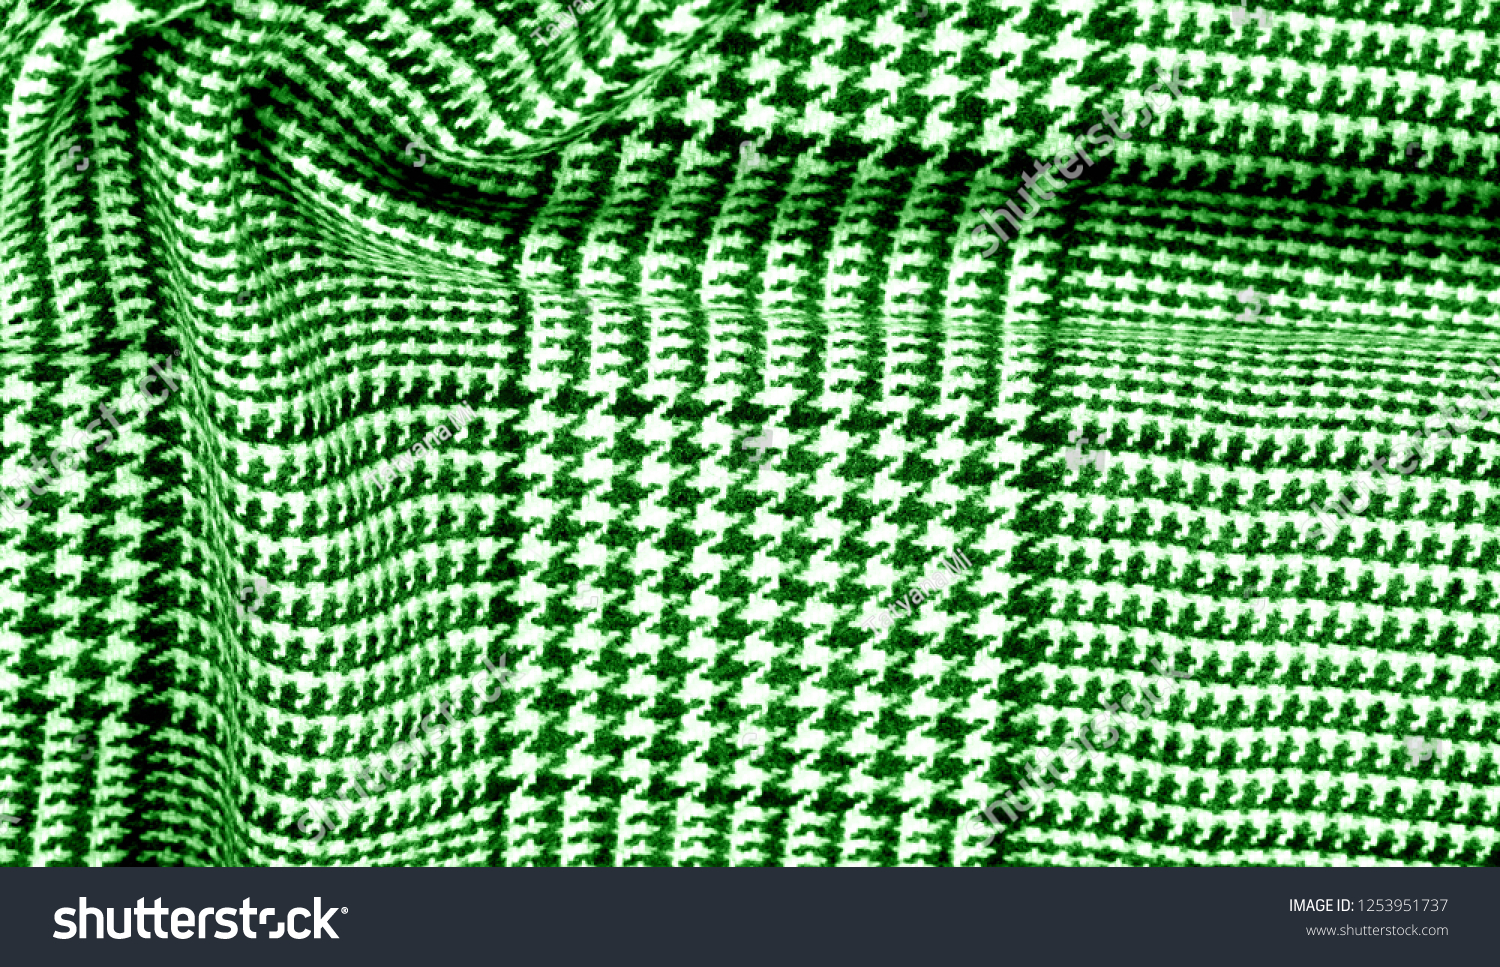 Background texture pattern. The fabric is thick, warm with a checkered pattern green This soft double damping with a light weight is ideal for design and more! Features yarn dyed checkered dark green #1253951737